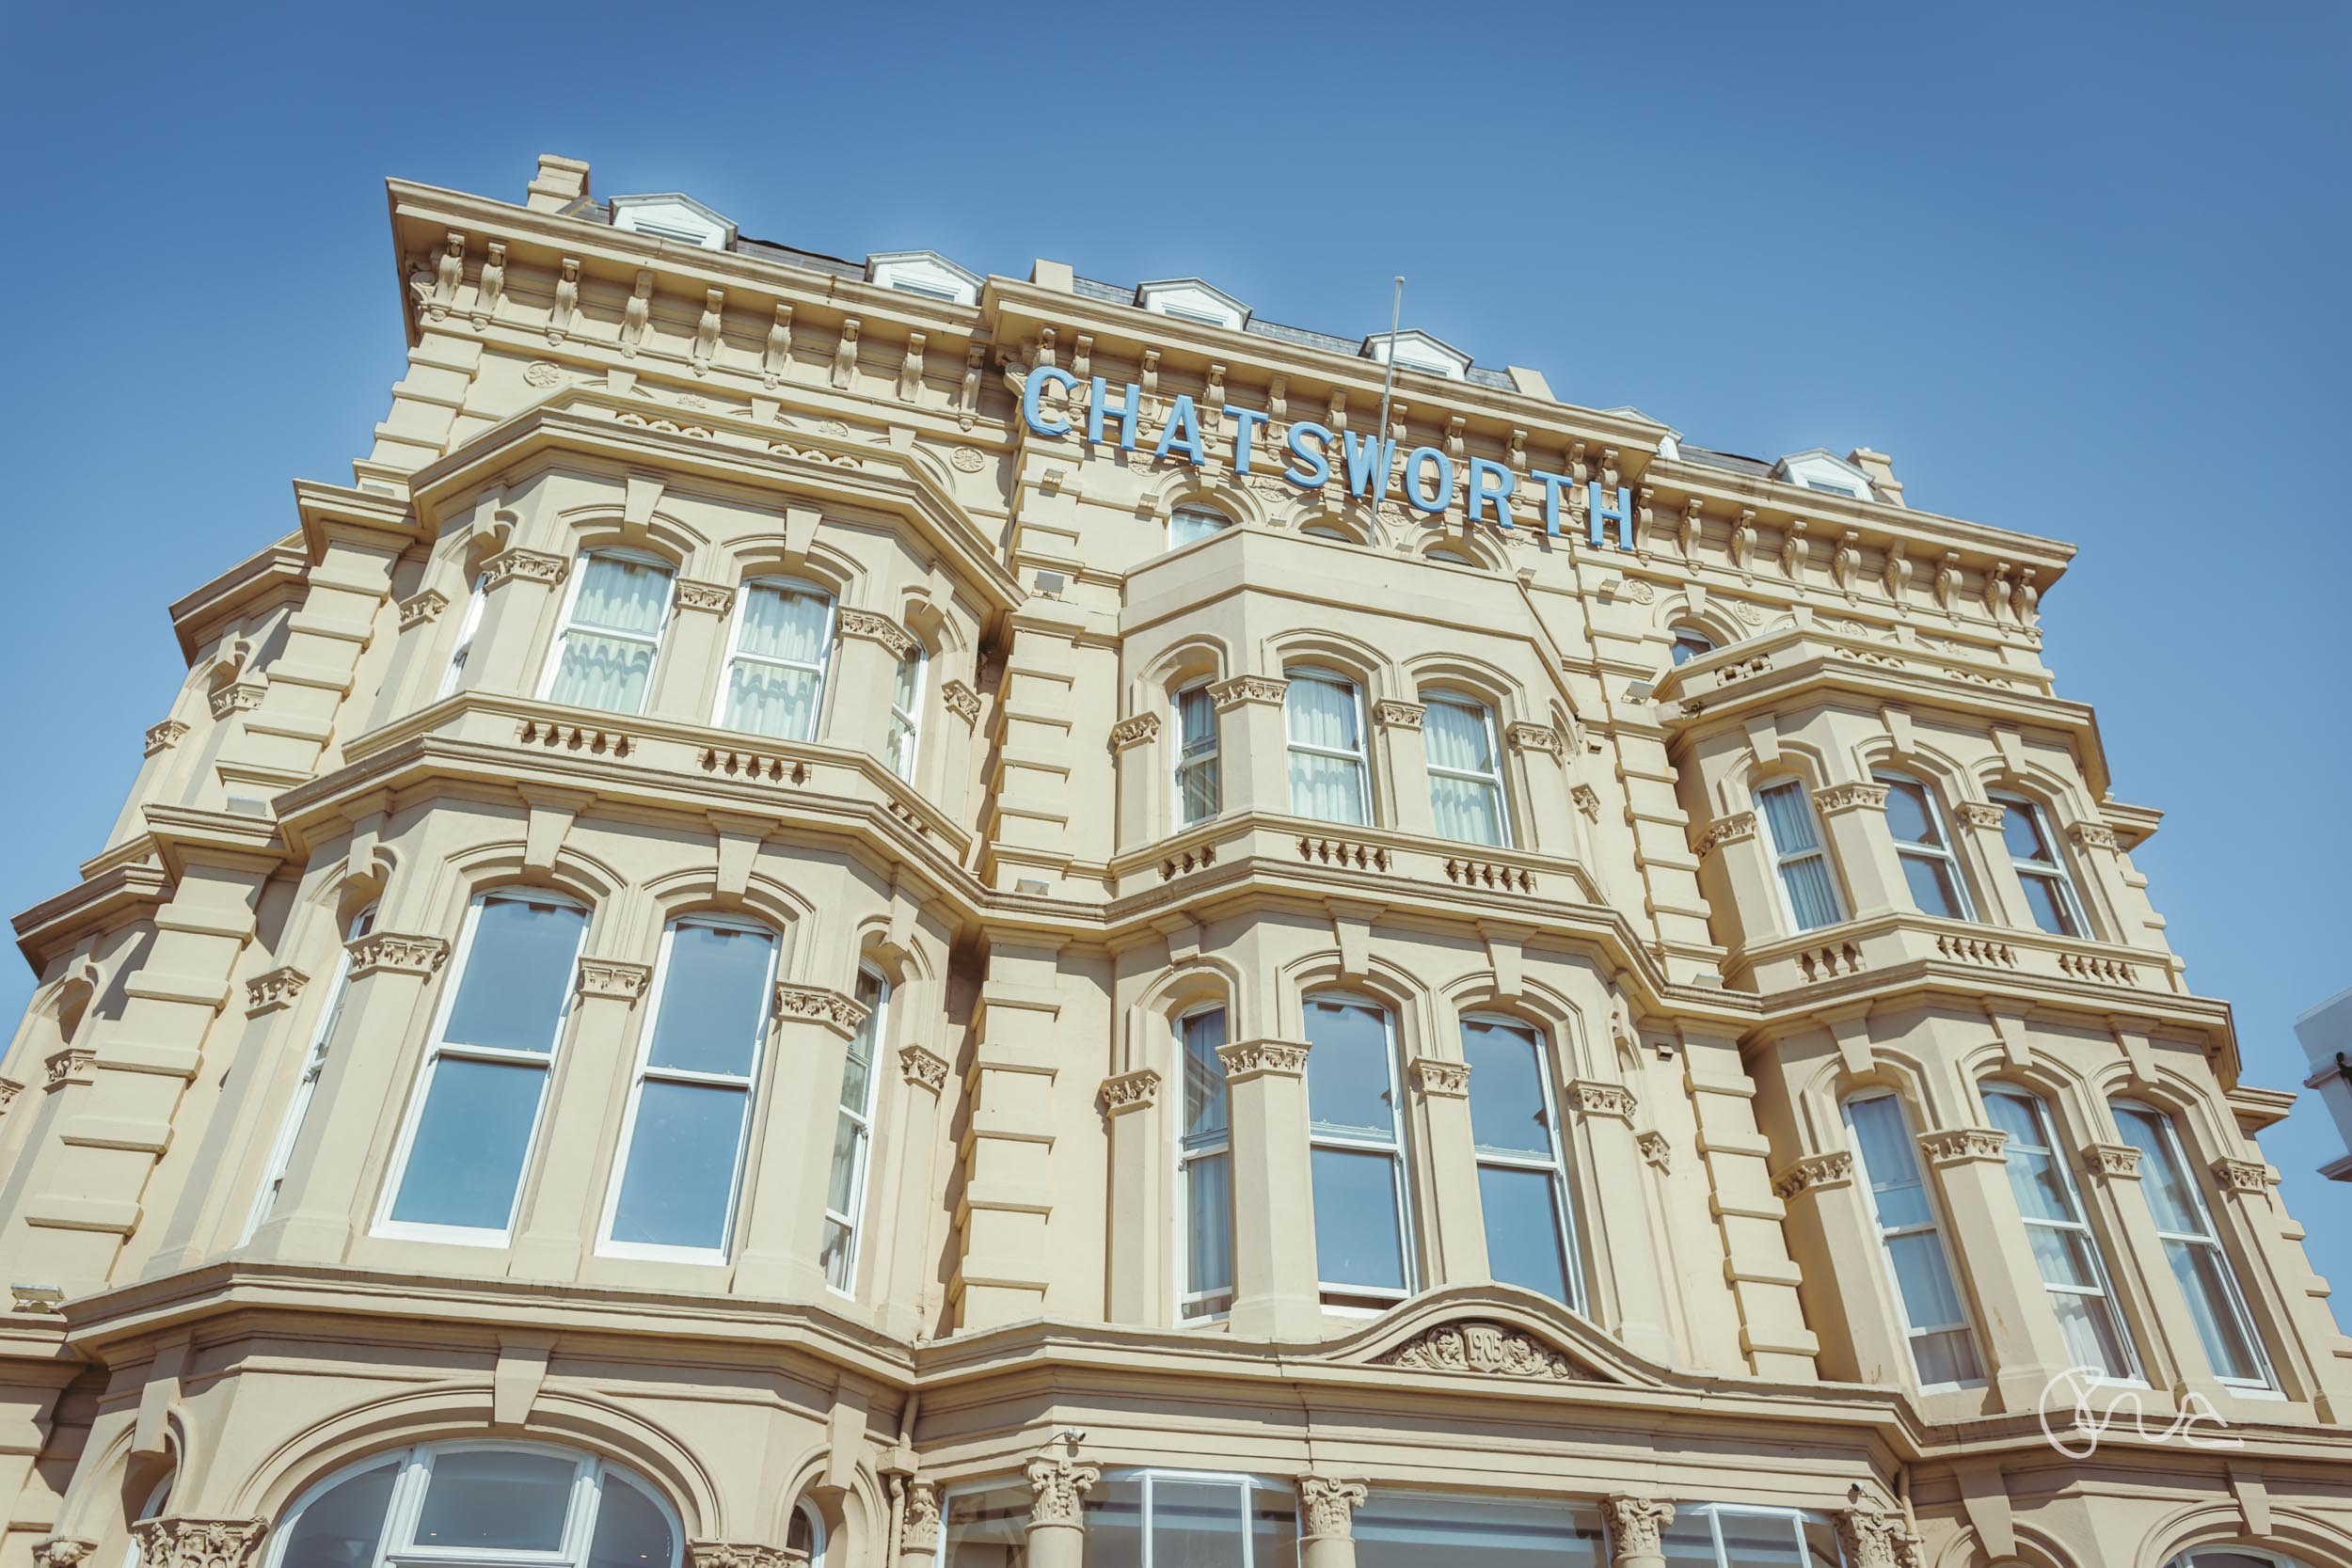 The Chatsworth Hotel in Eastbourne